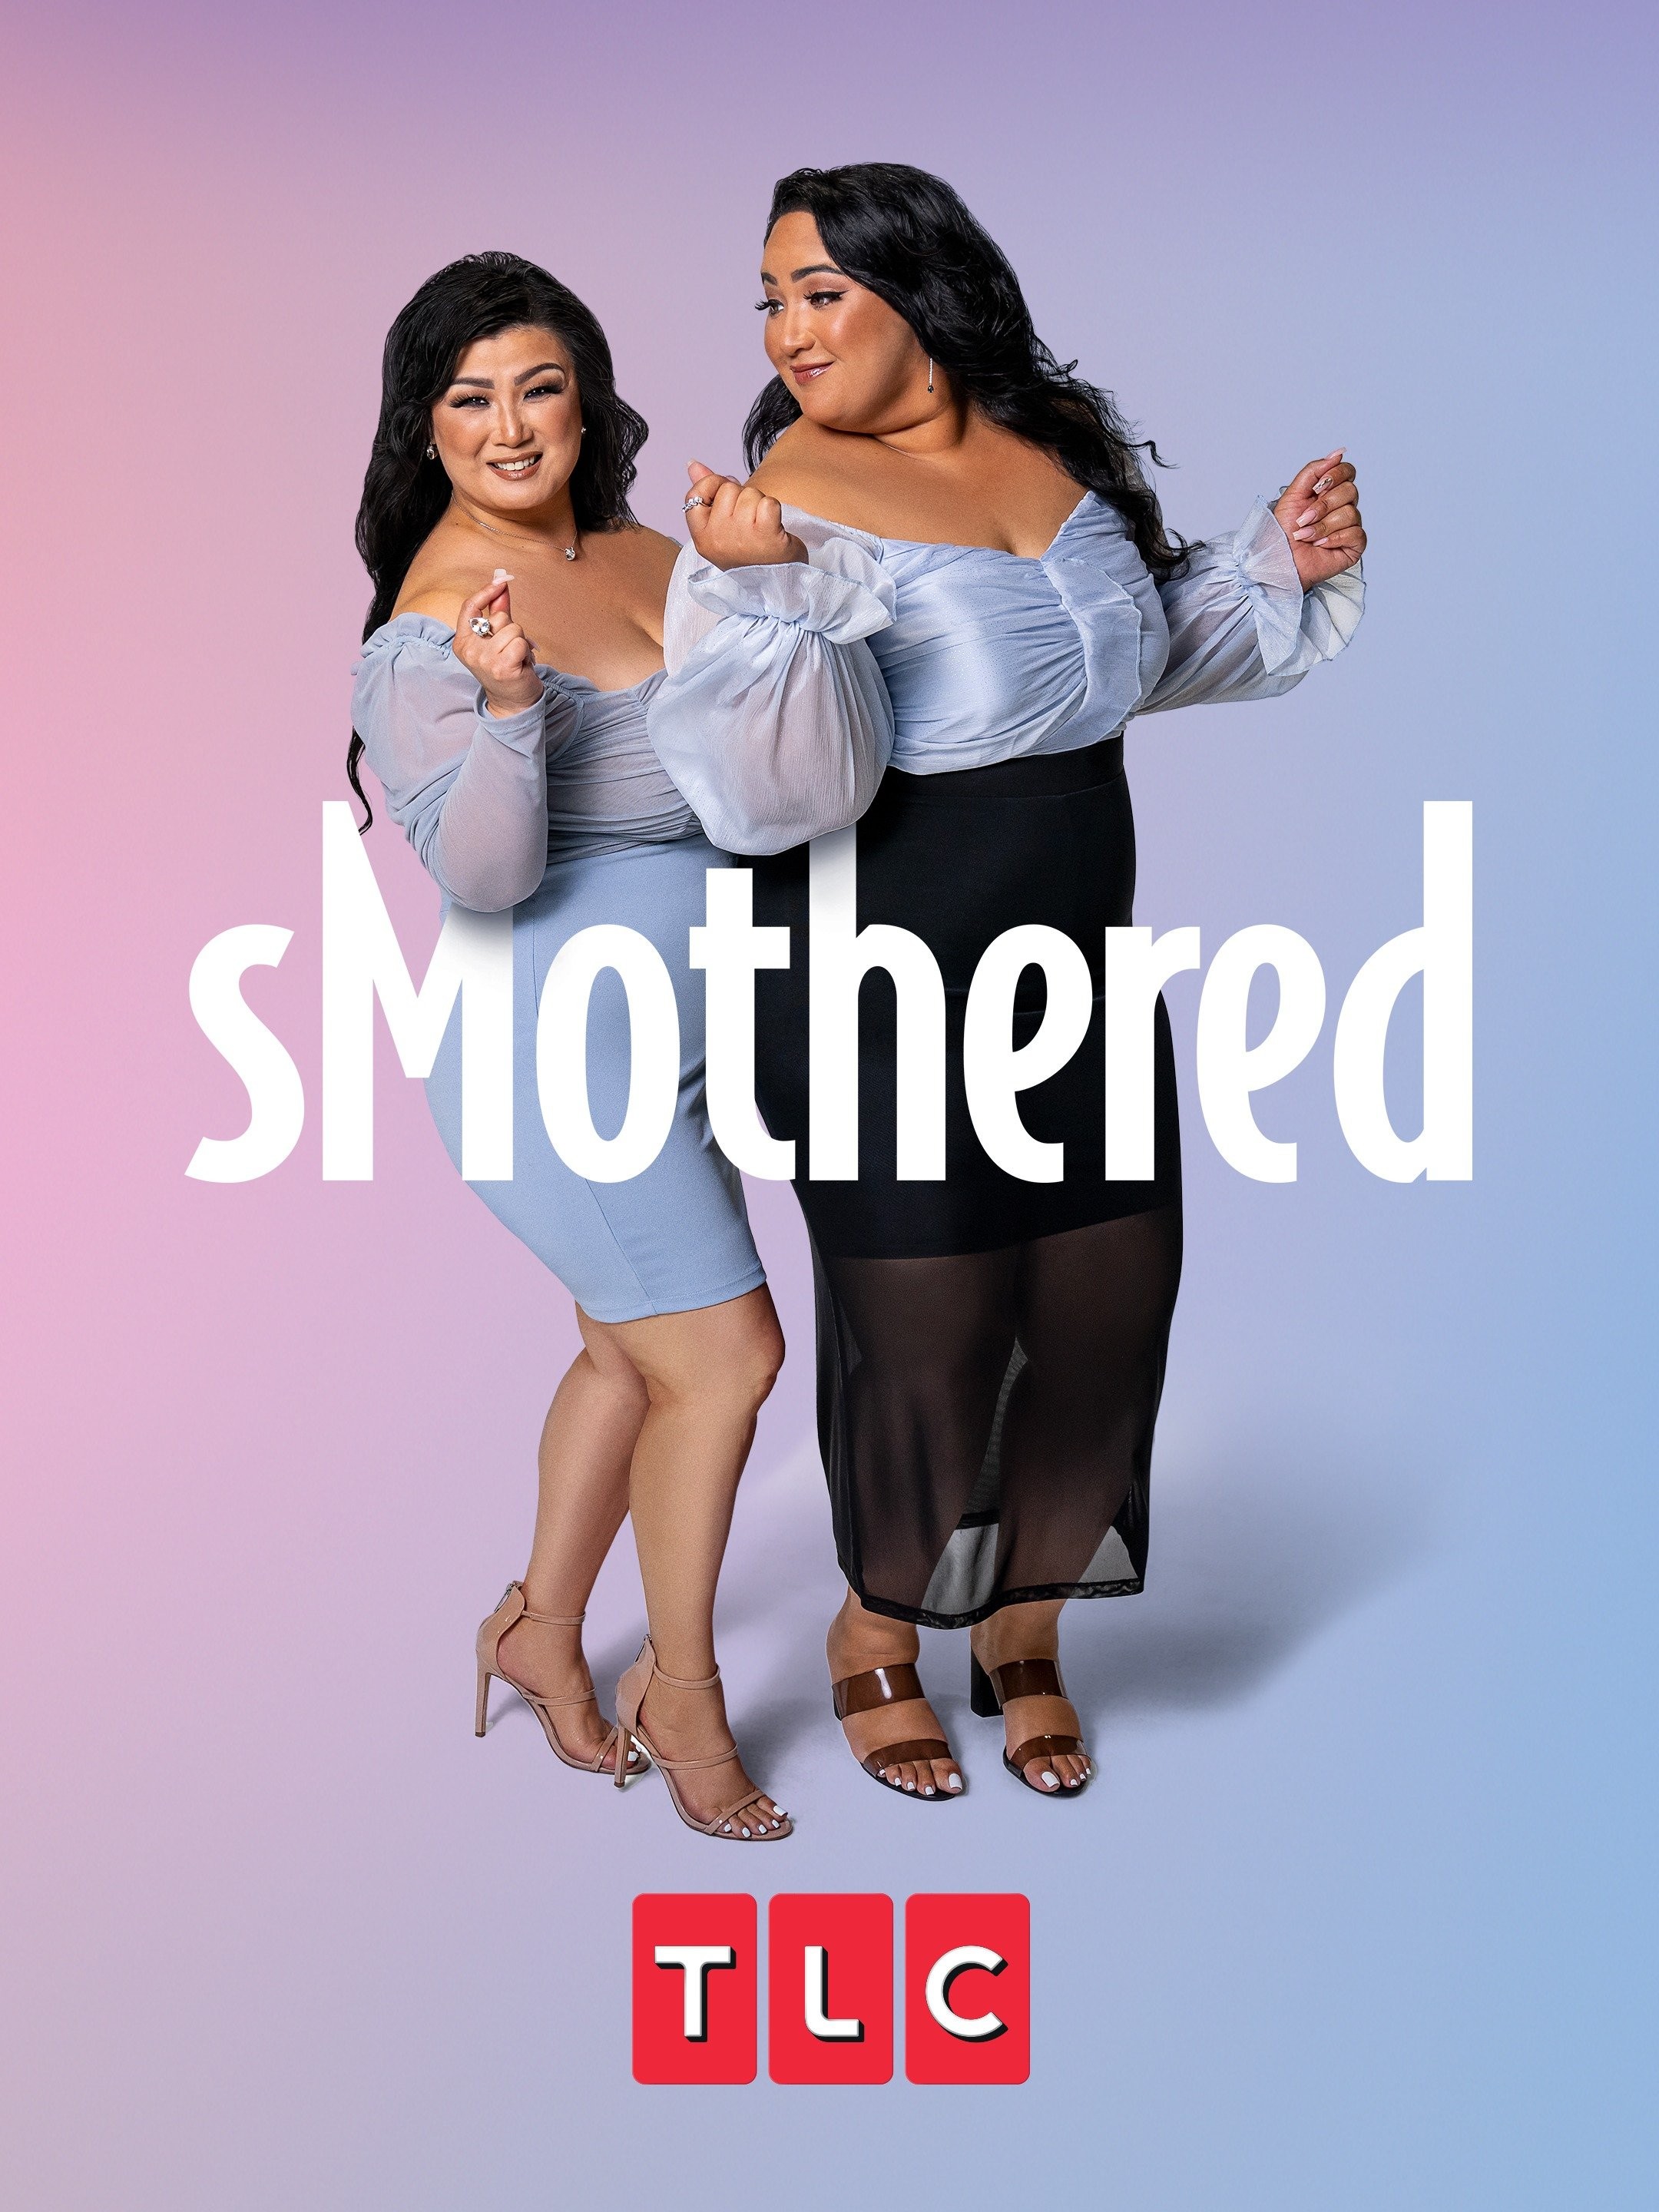 sMothered by her and she's #sMothered by me. @tlc @discoveryplus